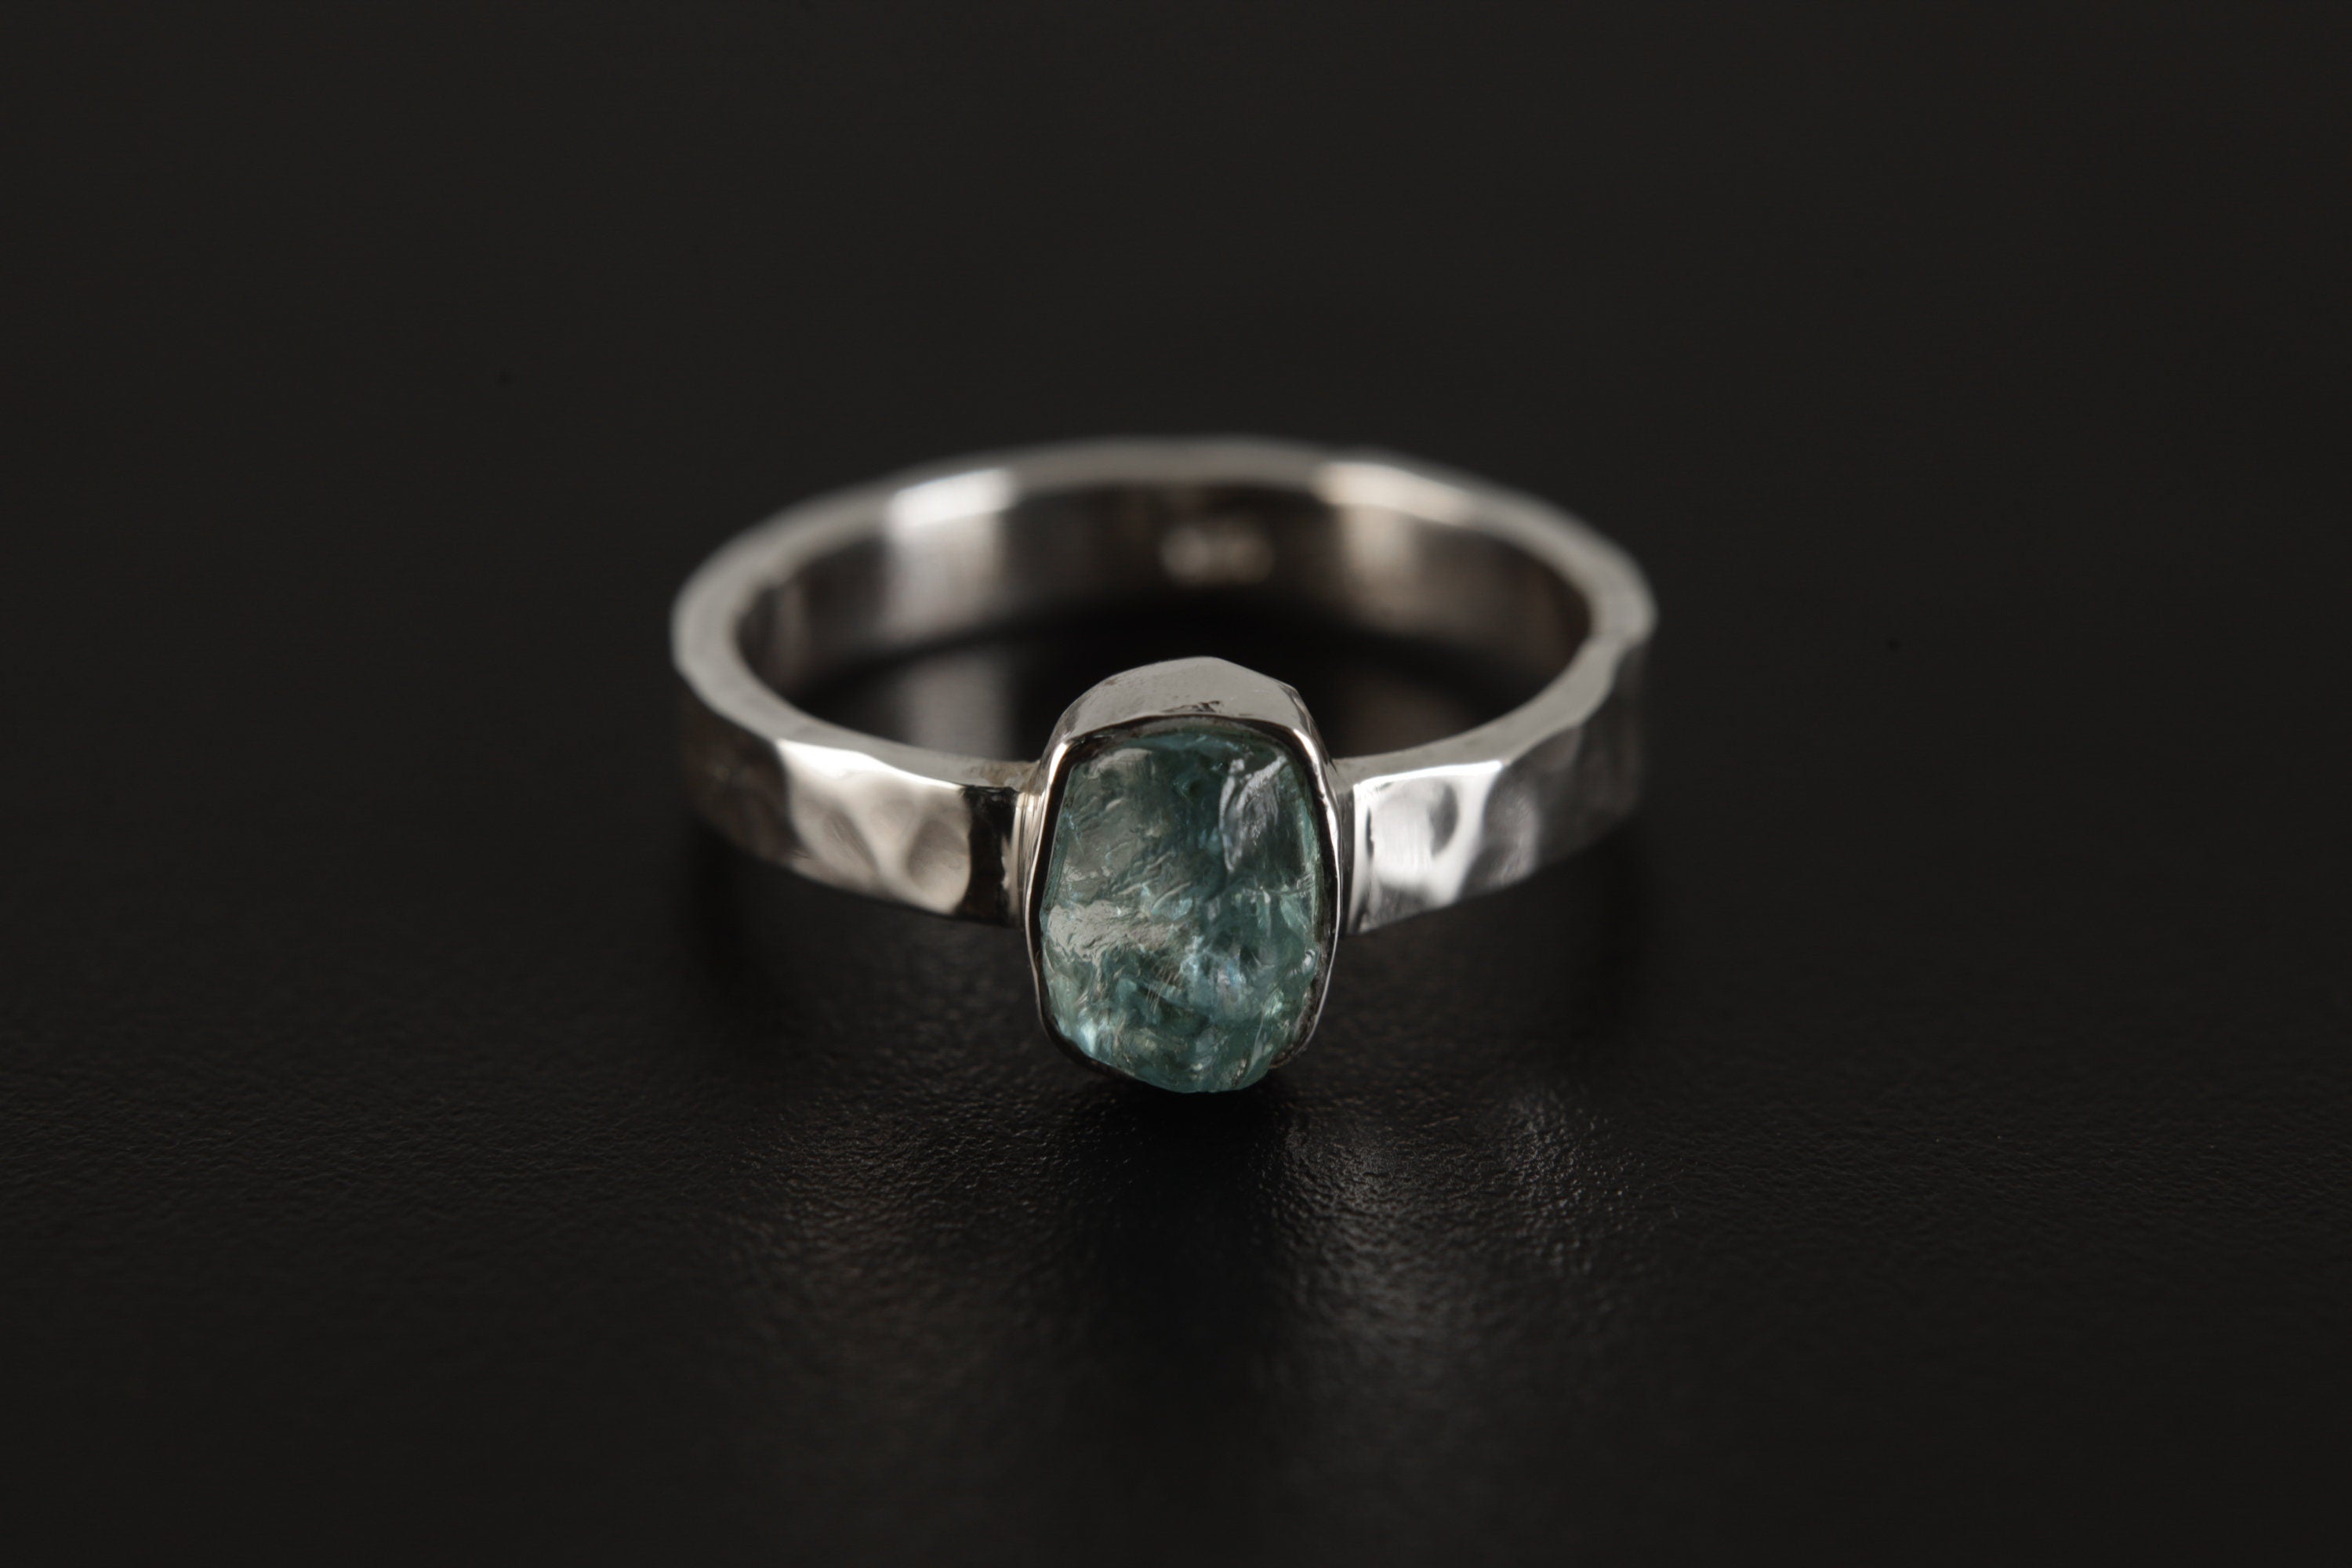 Azure Radiance - Raw Blue Apatite - Sterling Silver Ring - Hammer Textured & Shiny Finish - Size 5-9 US